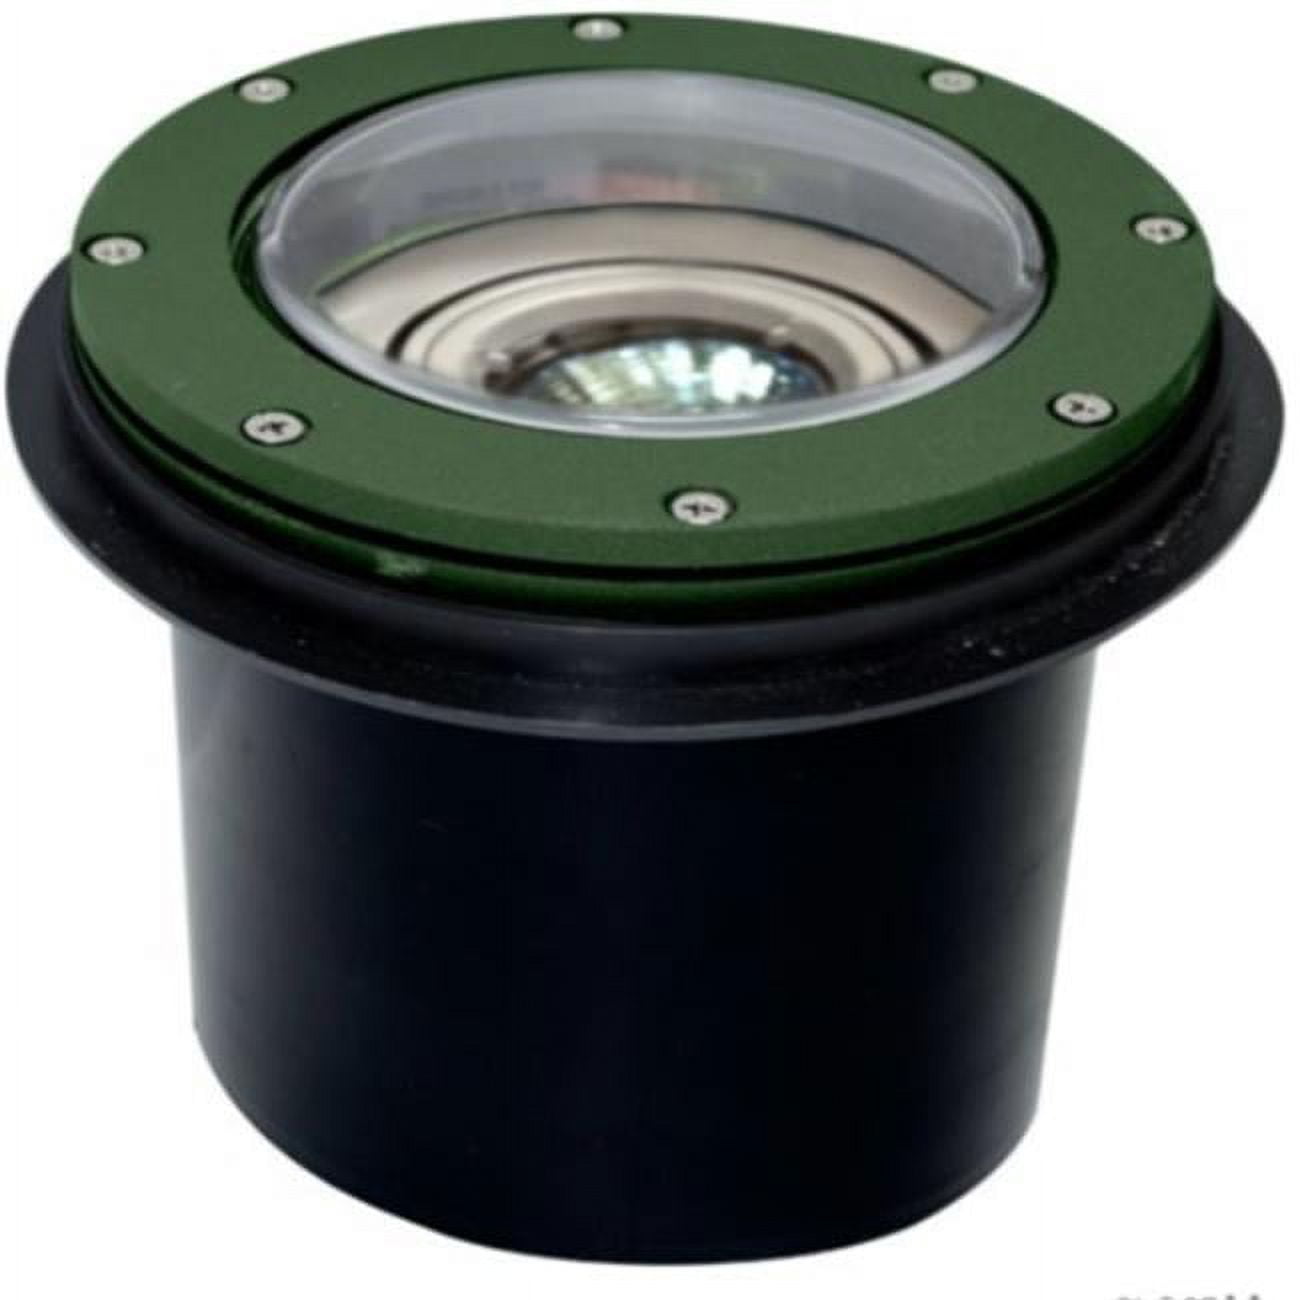 Wall Light Without Grill Adjustable 7w Led - Mr16 12v, Green